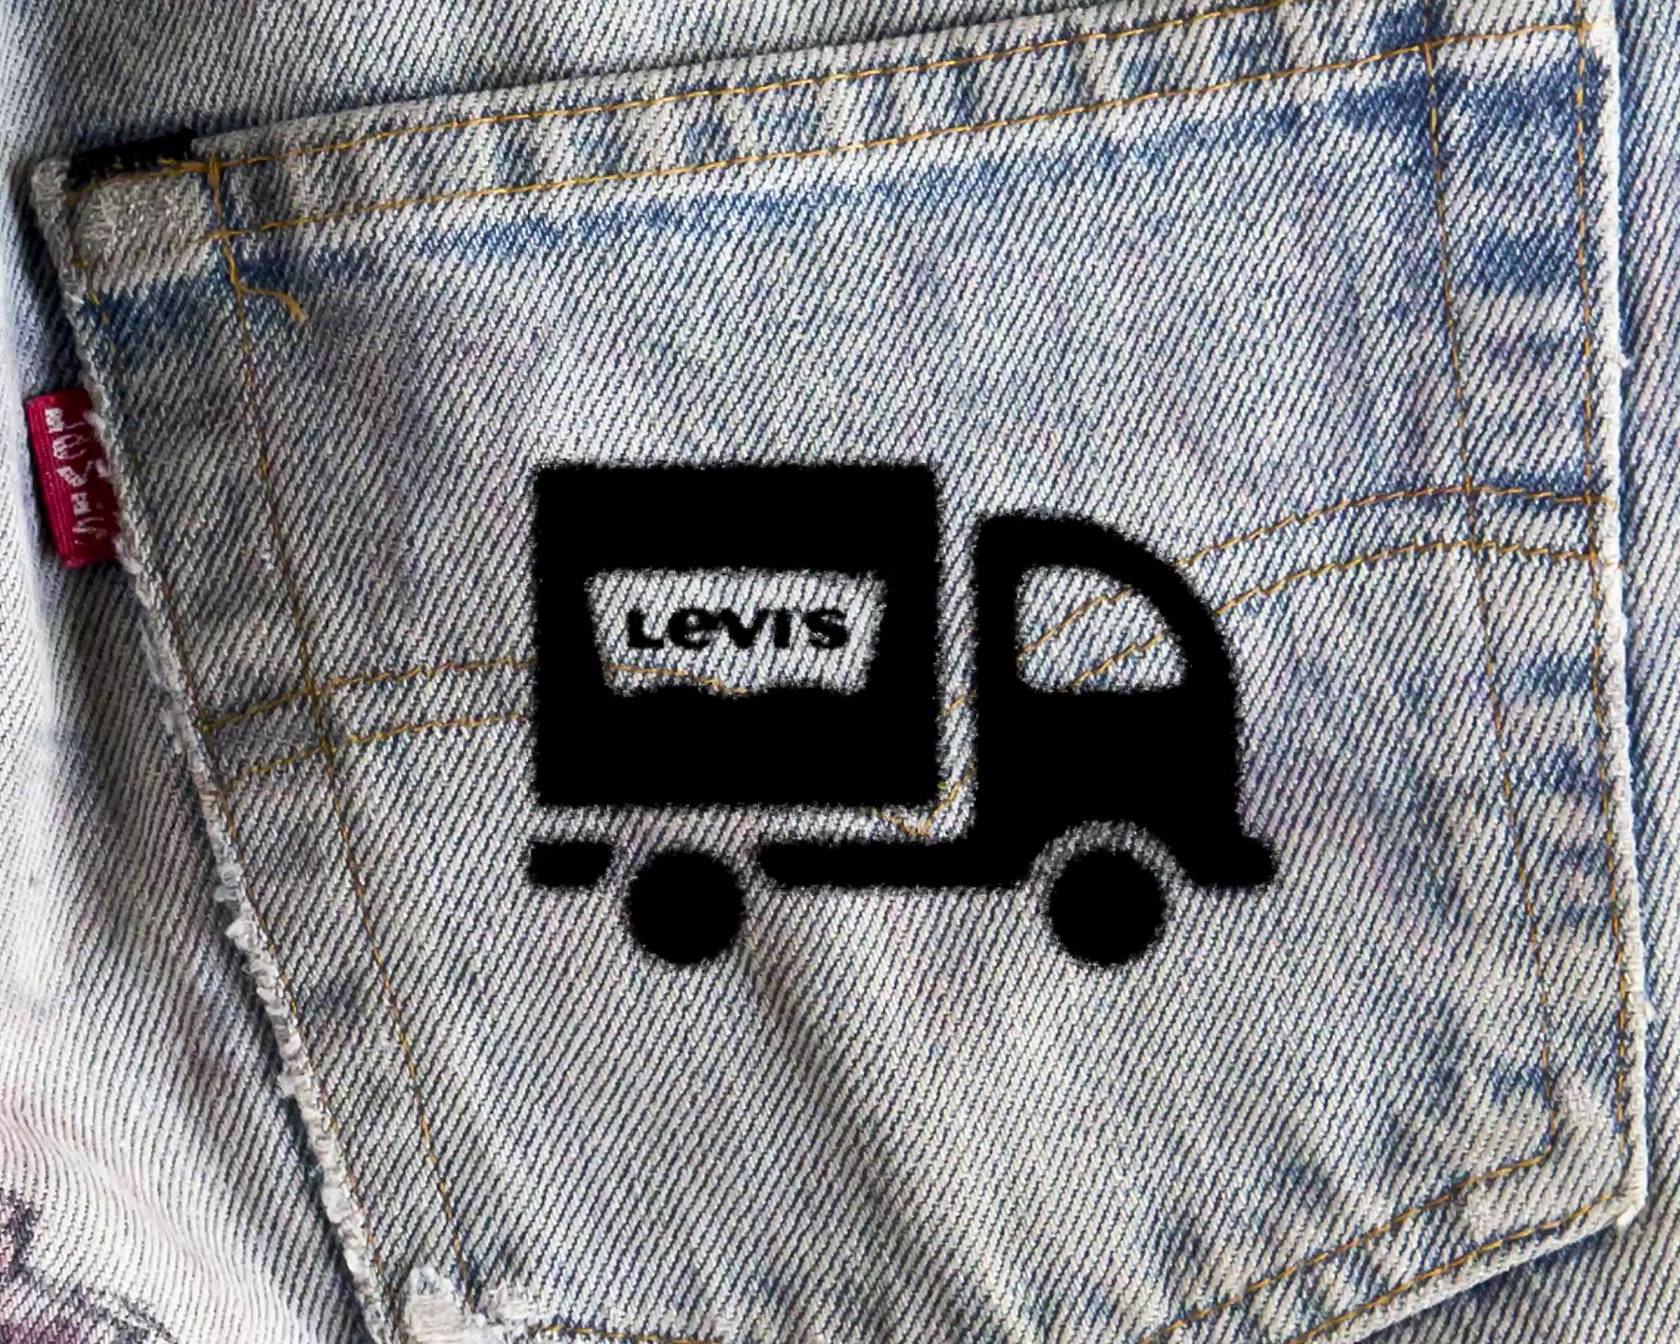 Animated shipping truck icon over top of a light wash jeans image